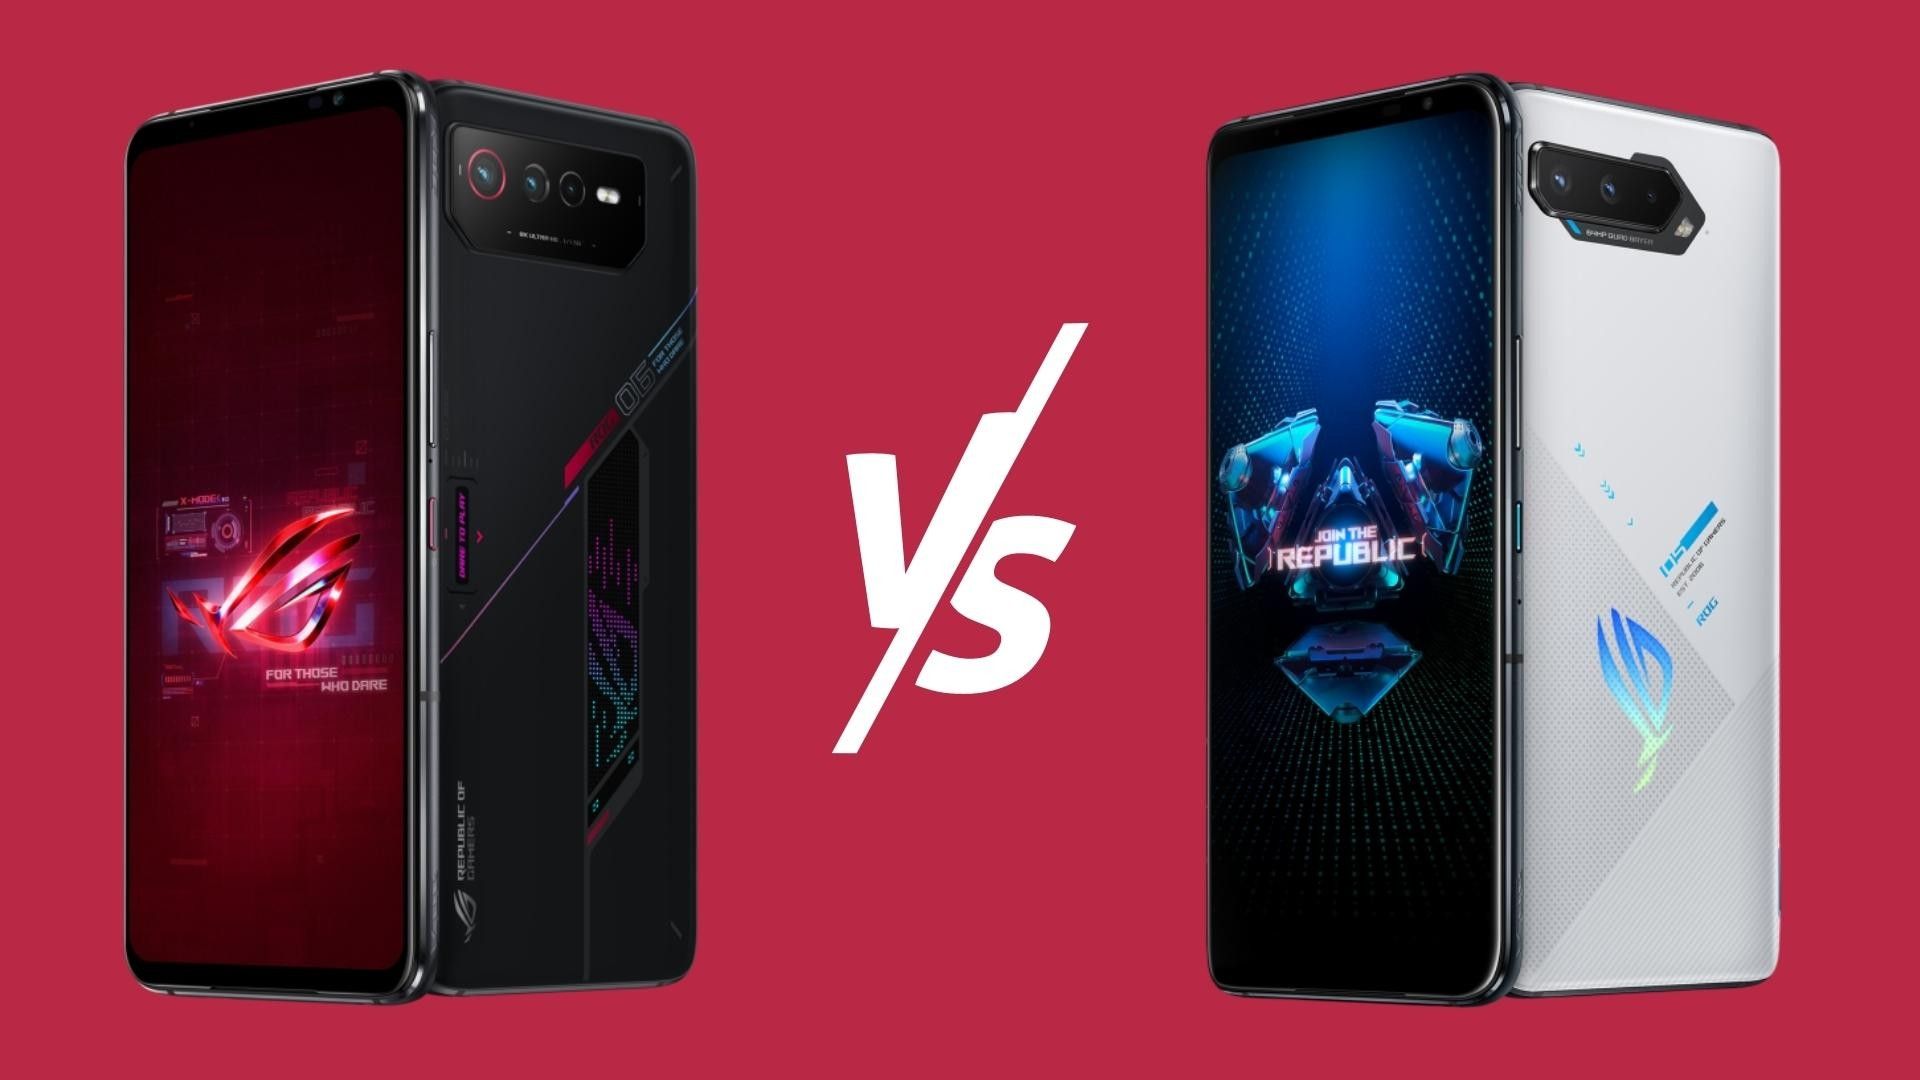 Asus ROG Phone 6 vs Asus ROG Phone 5: What is new and improved in